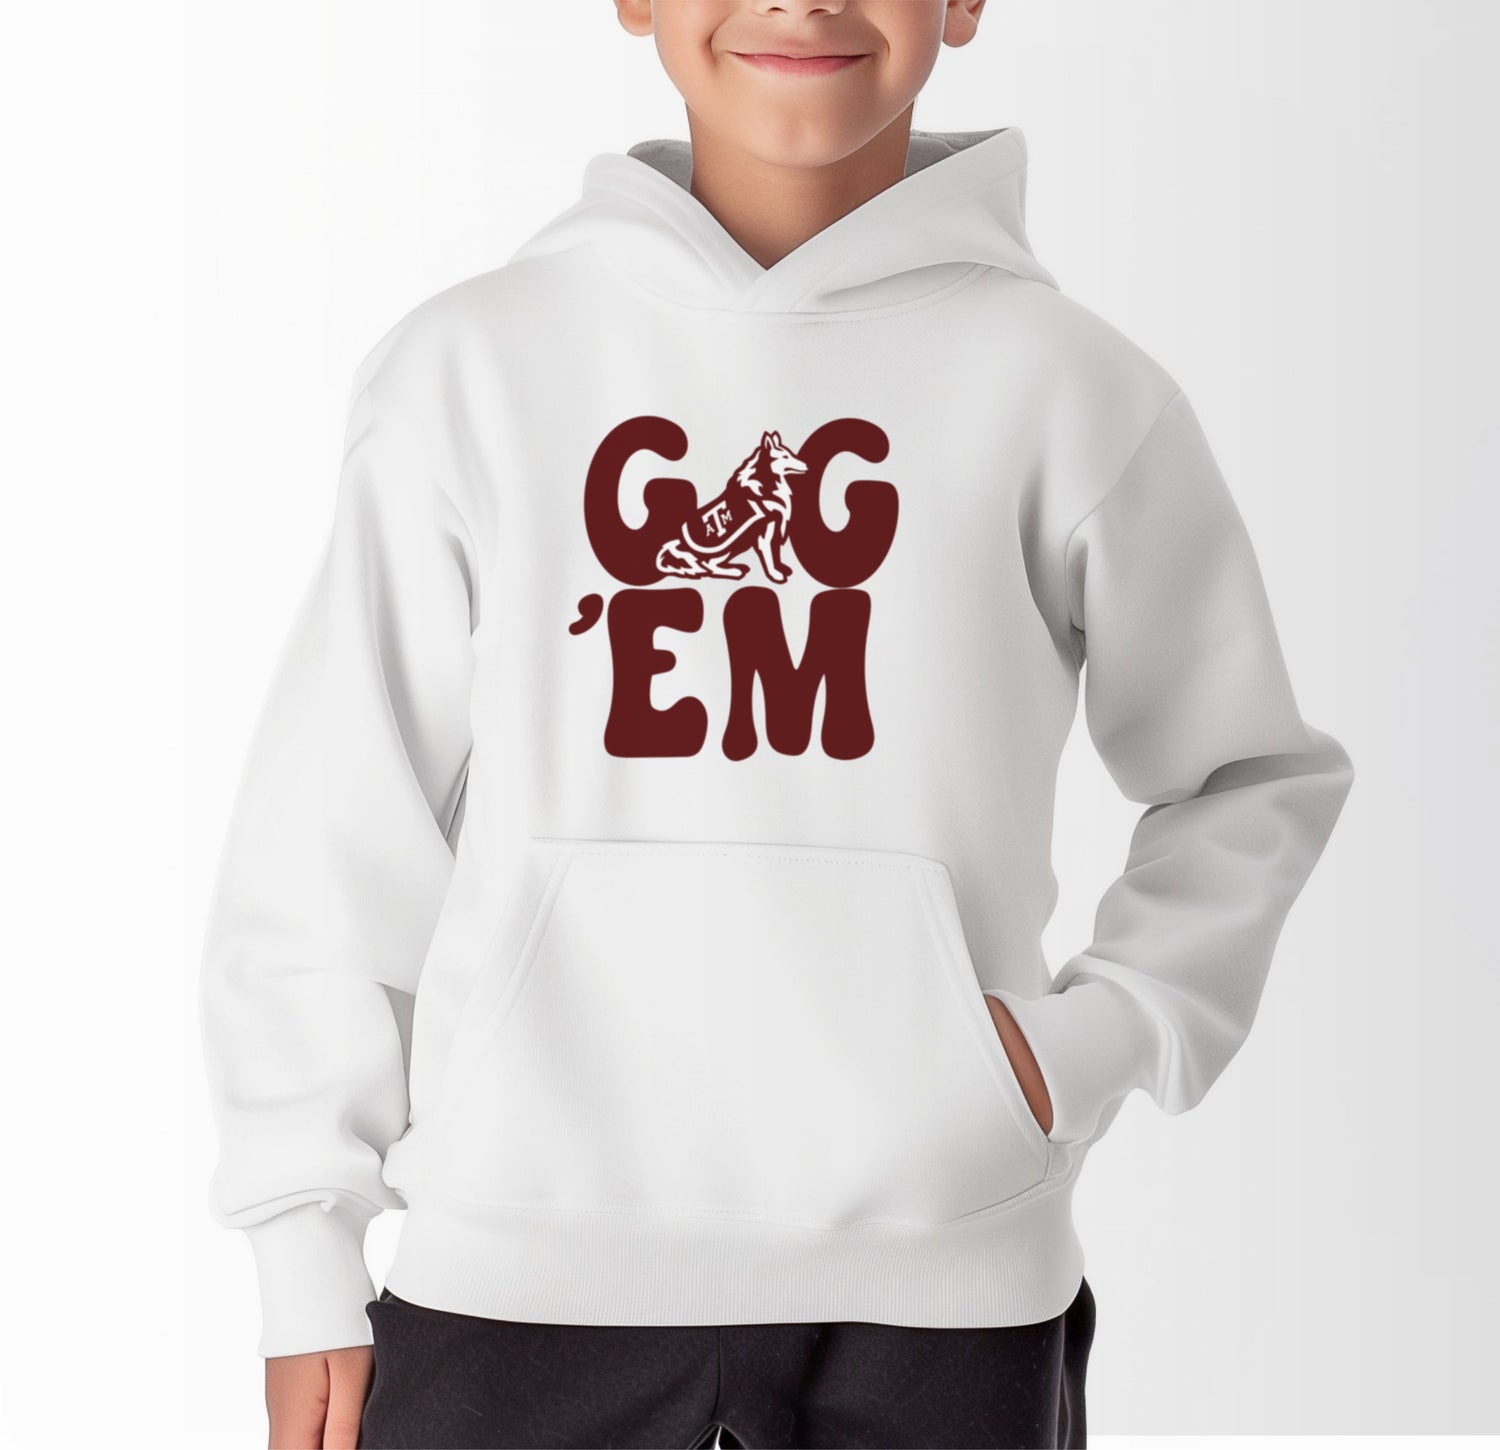 A model wears the White Youth Unisex Texas A&M Gig 'Em Retro Reveille Hooded Sweatshirt.  The ﻿Texas A&M Gig 'Em Retro Reveille﻿ graphic is in bold Maroon in a Groovy Vintage style.